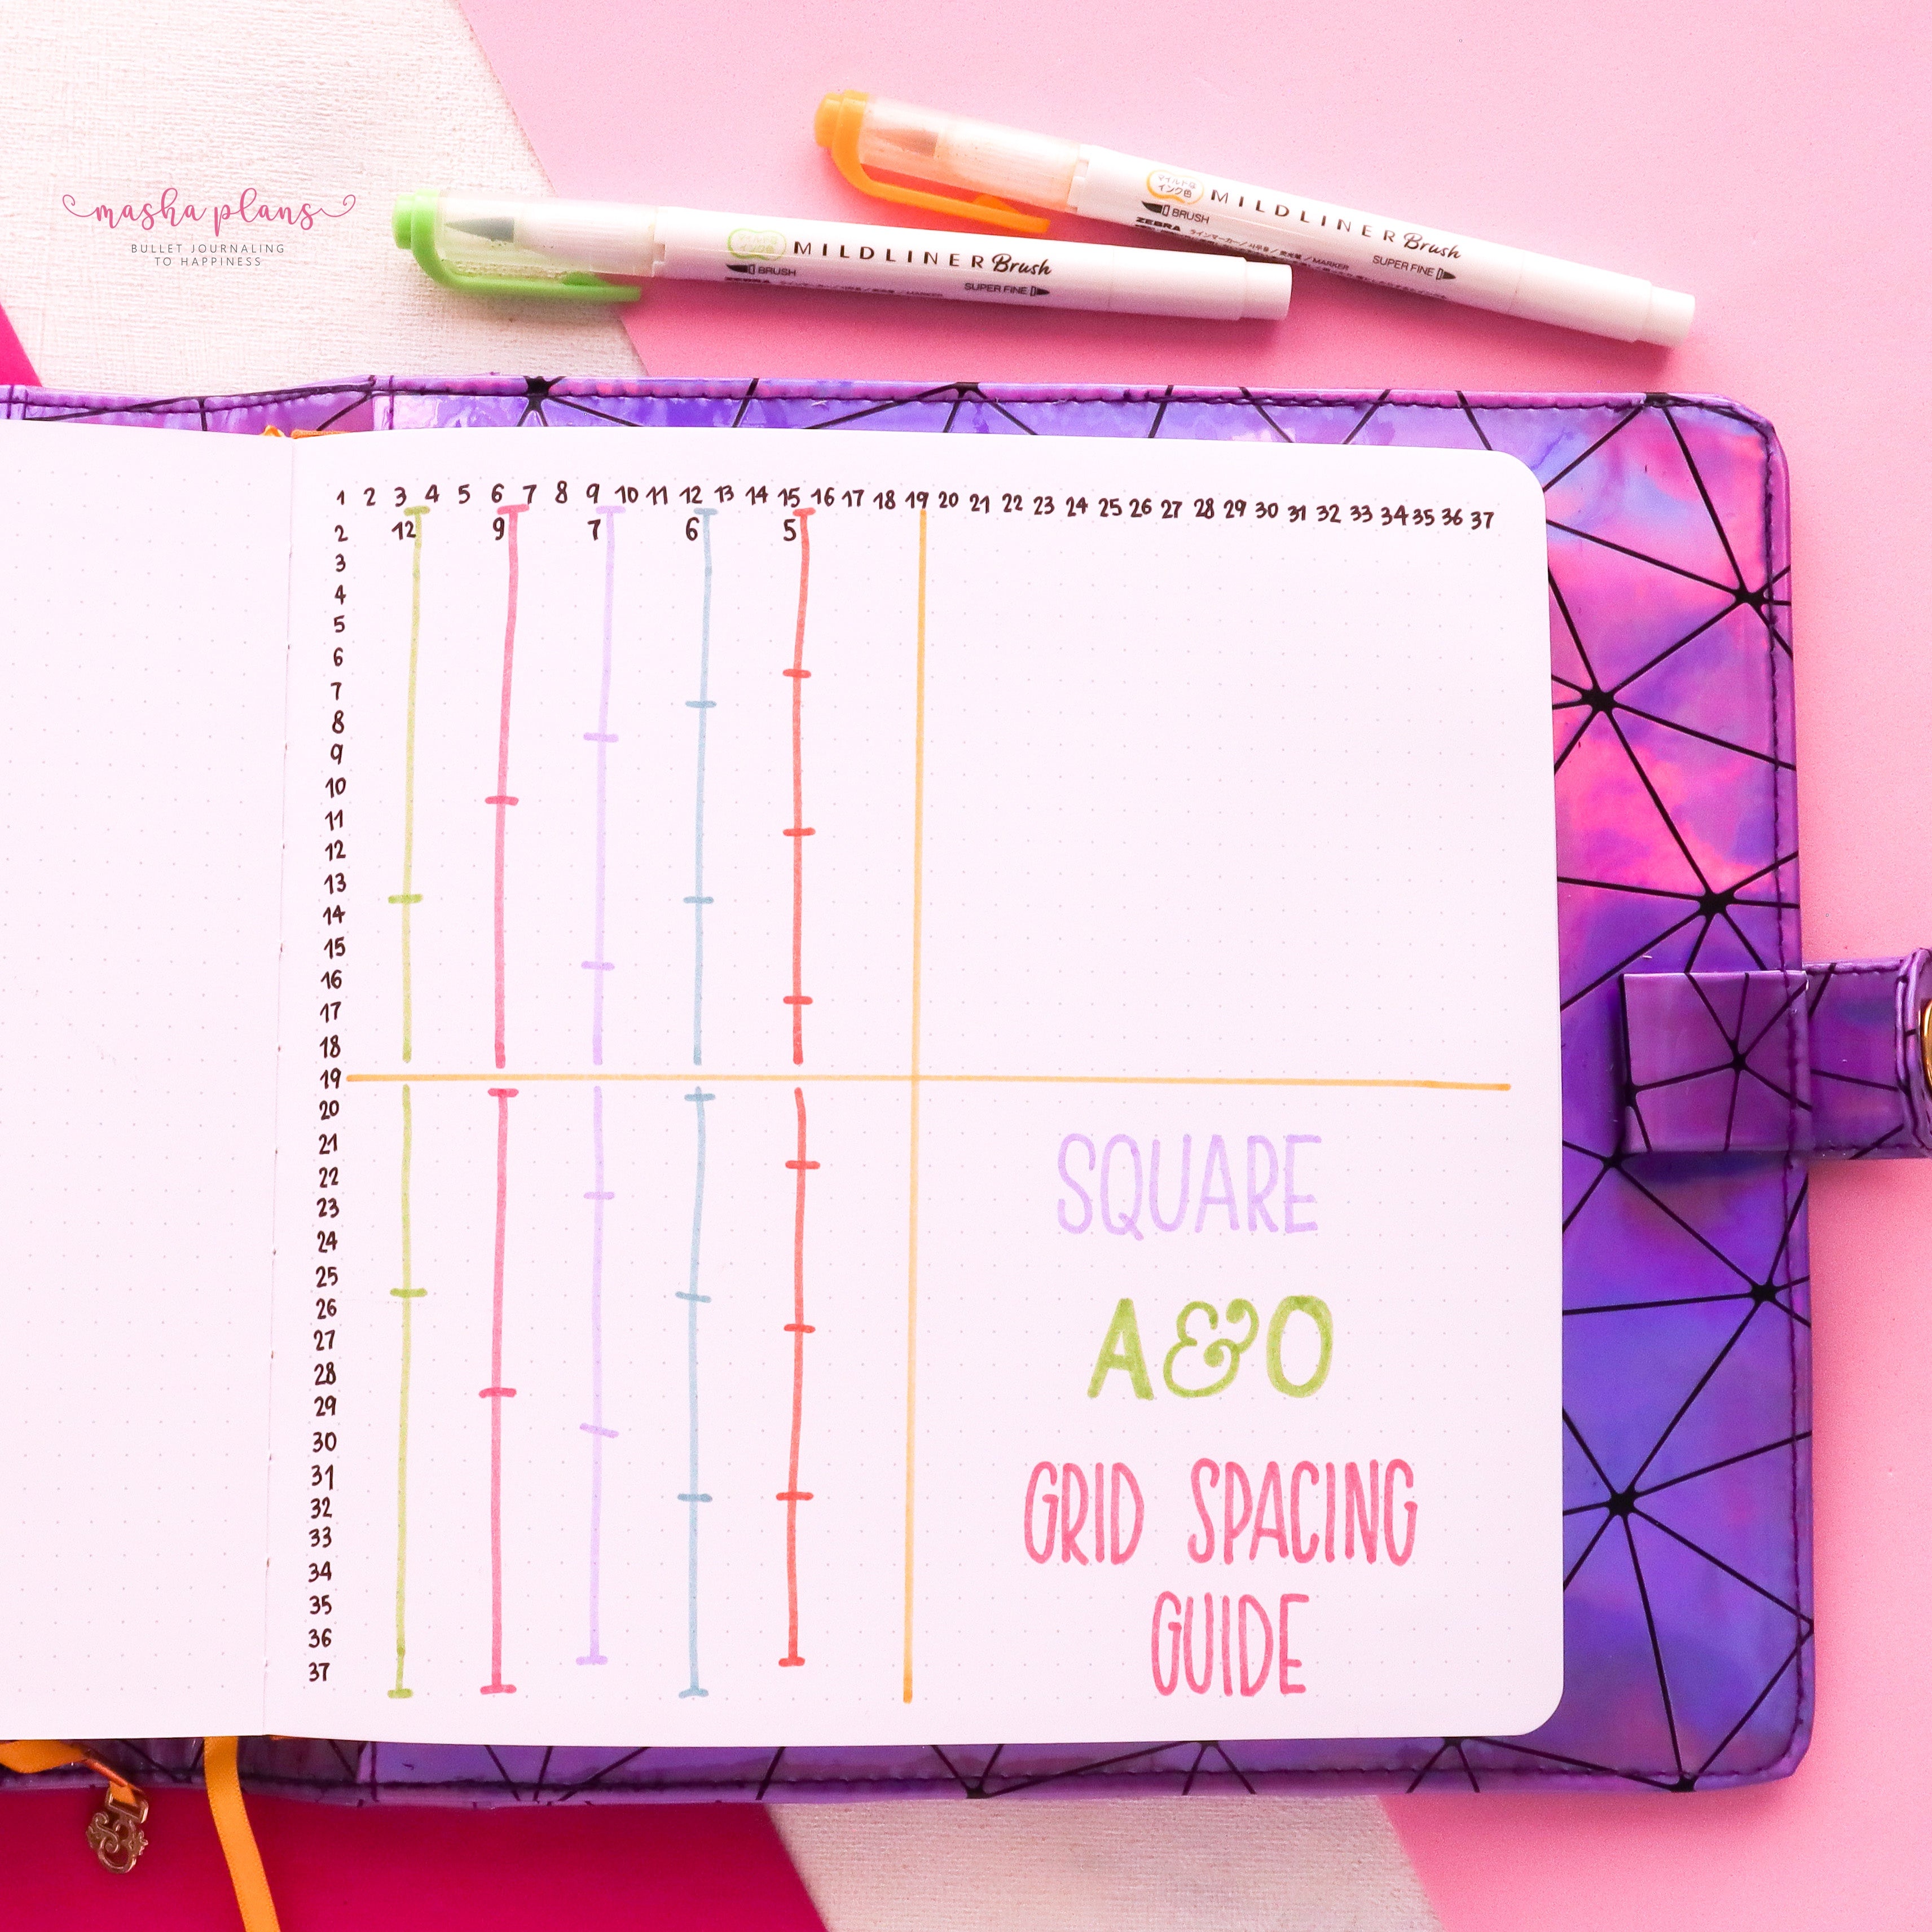 How to Set Up a Bullet Journal Book Tracker (+ 18 Ideas) - Yop & Tom